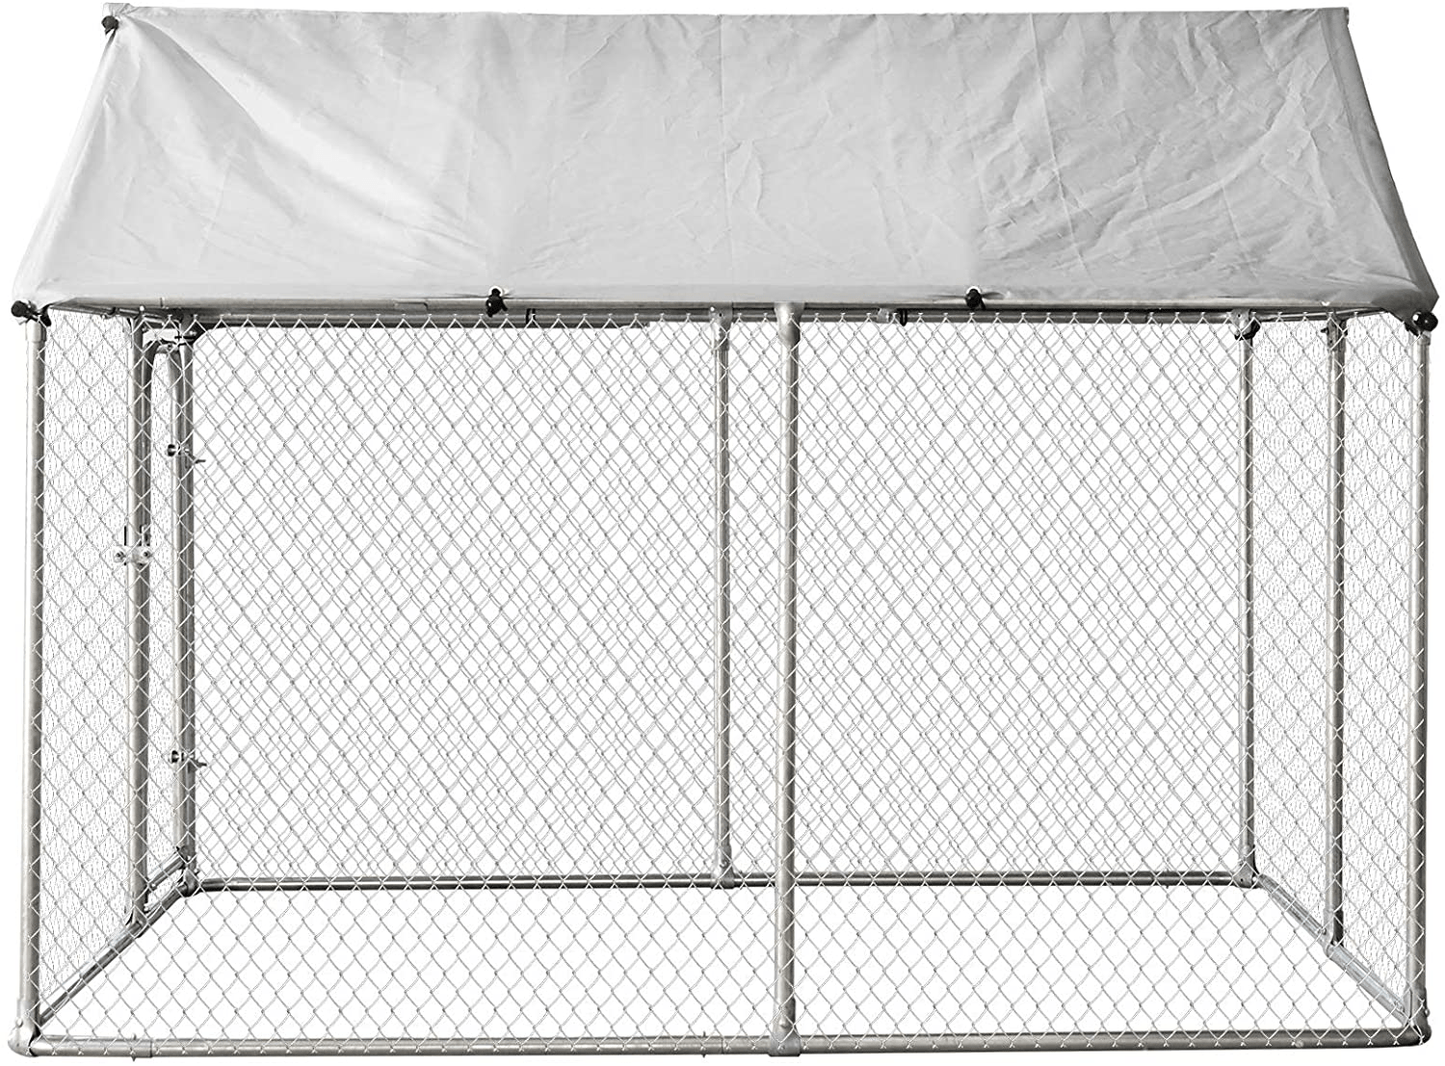 7.5'X7.5'X5.6' Large Outdoor Dog Kennel, Dog Cratefor Back or Front Yard Galvanized Steel Fence with Oxford Cloth Roof and Lock